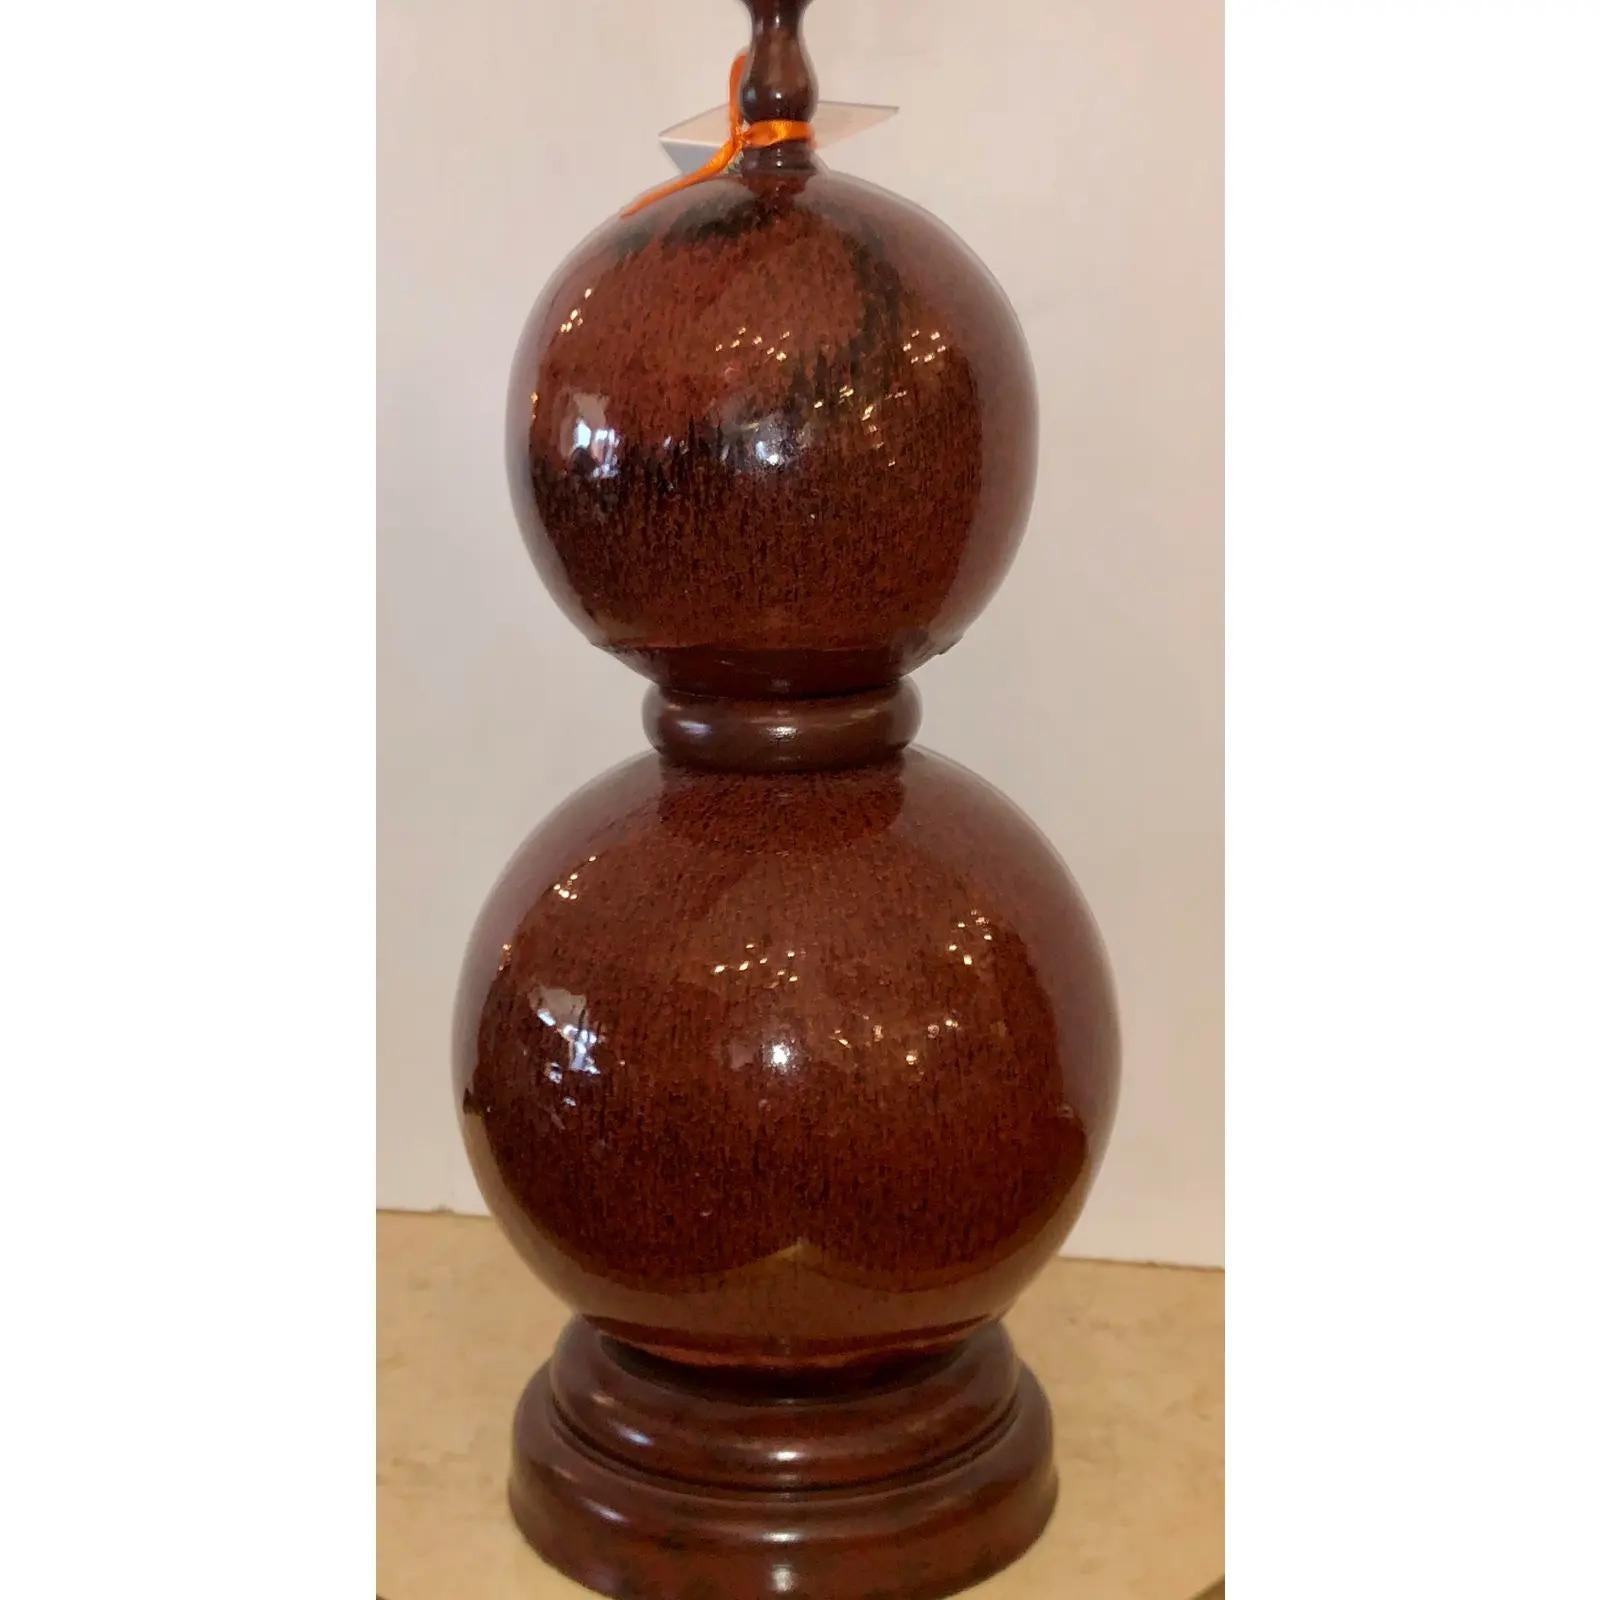 Vintage Red Majolica Pottery Double Gourd Lamp

Additional information:
Materials: Lights, Pottery
Color: Red
Period: 1990s
Styles: Mid-Century Modern
Lamp Shade: Not Included
Item Type: Vintage, Antique or Pre-owned
Dimensions: 8